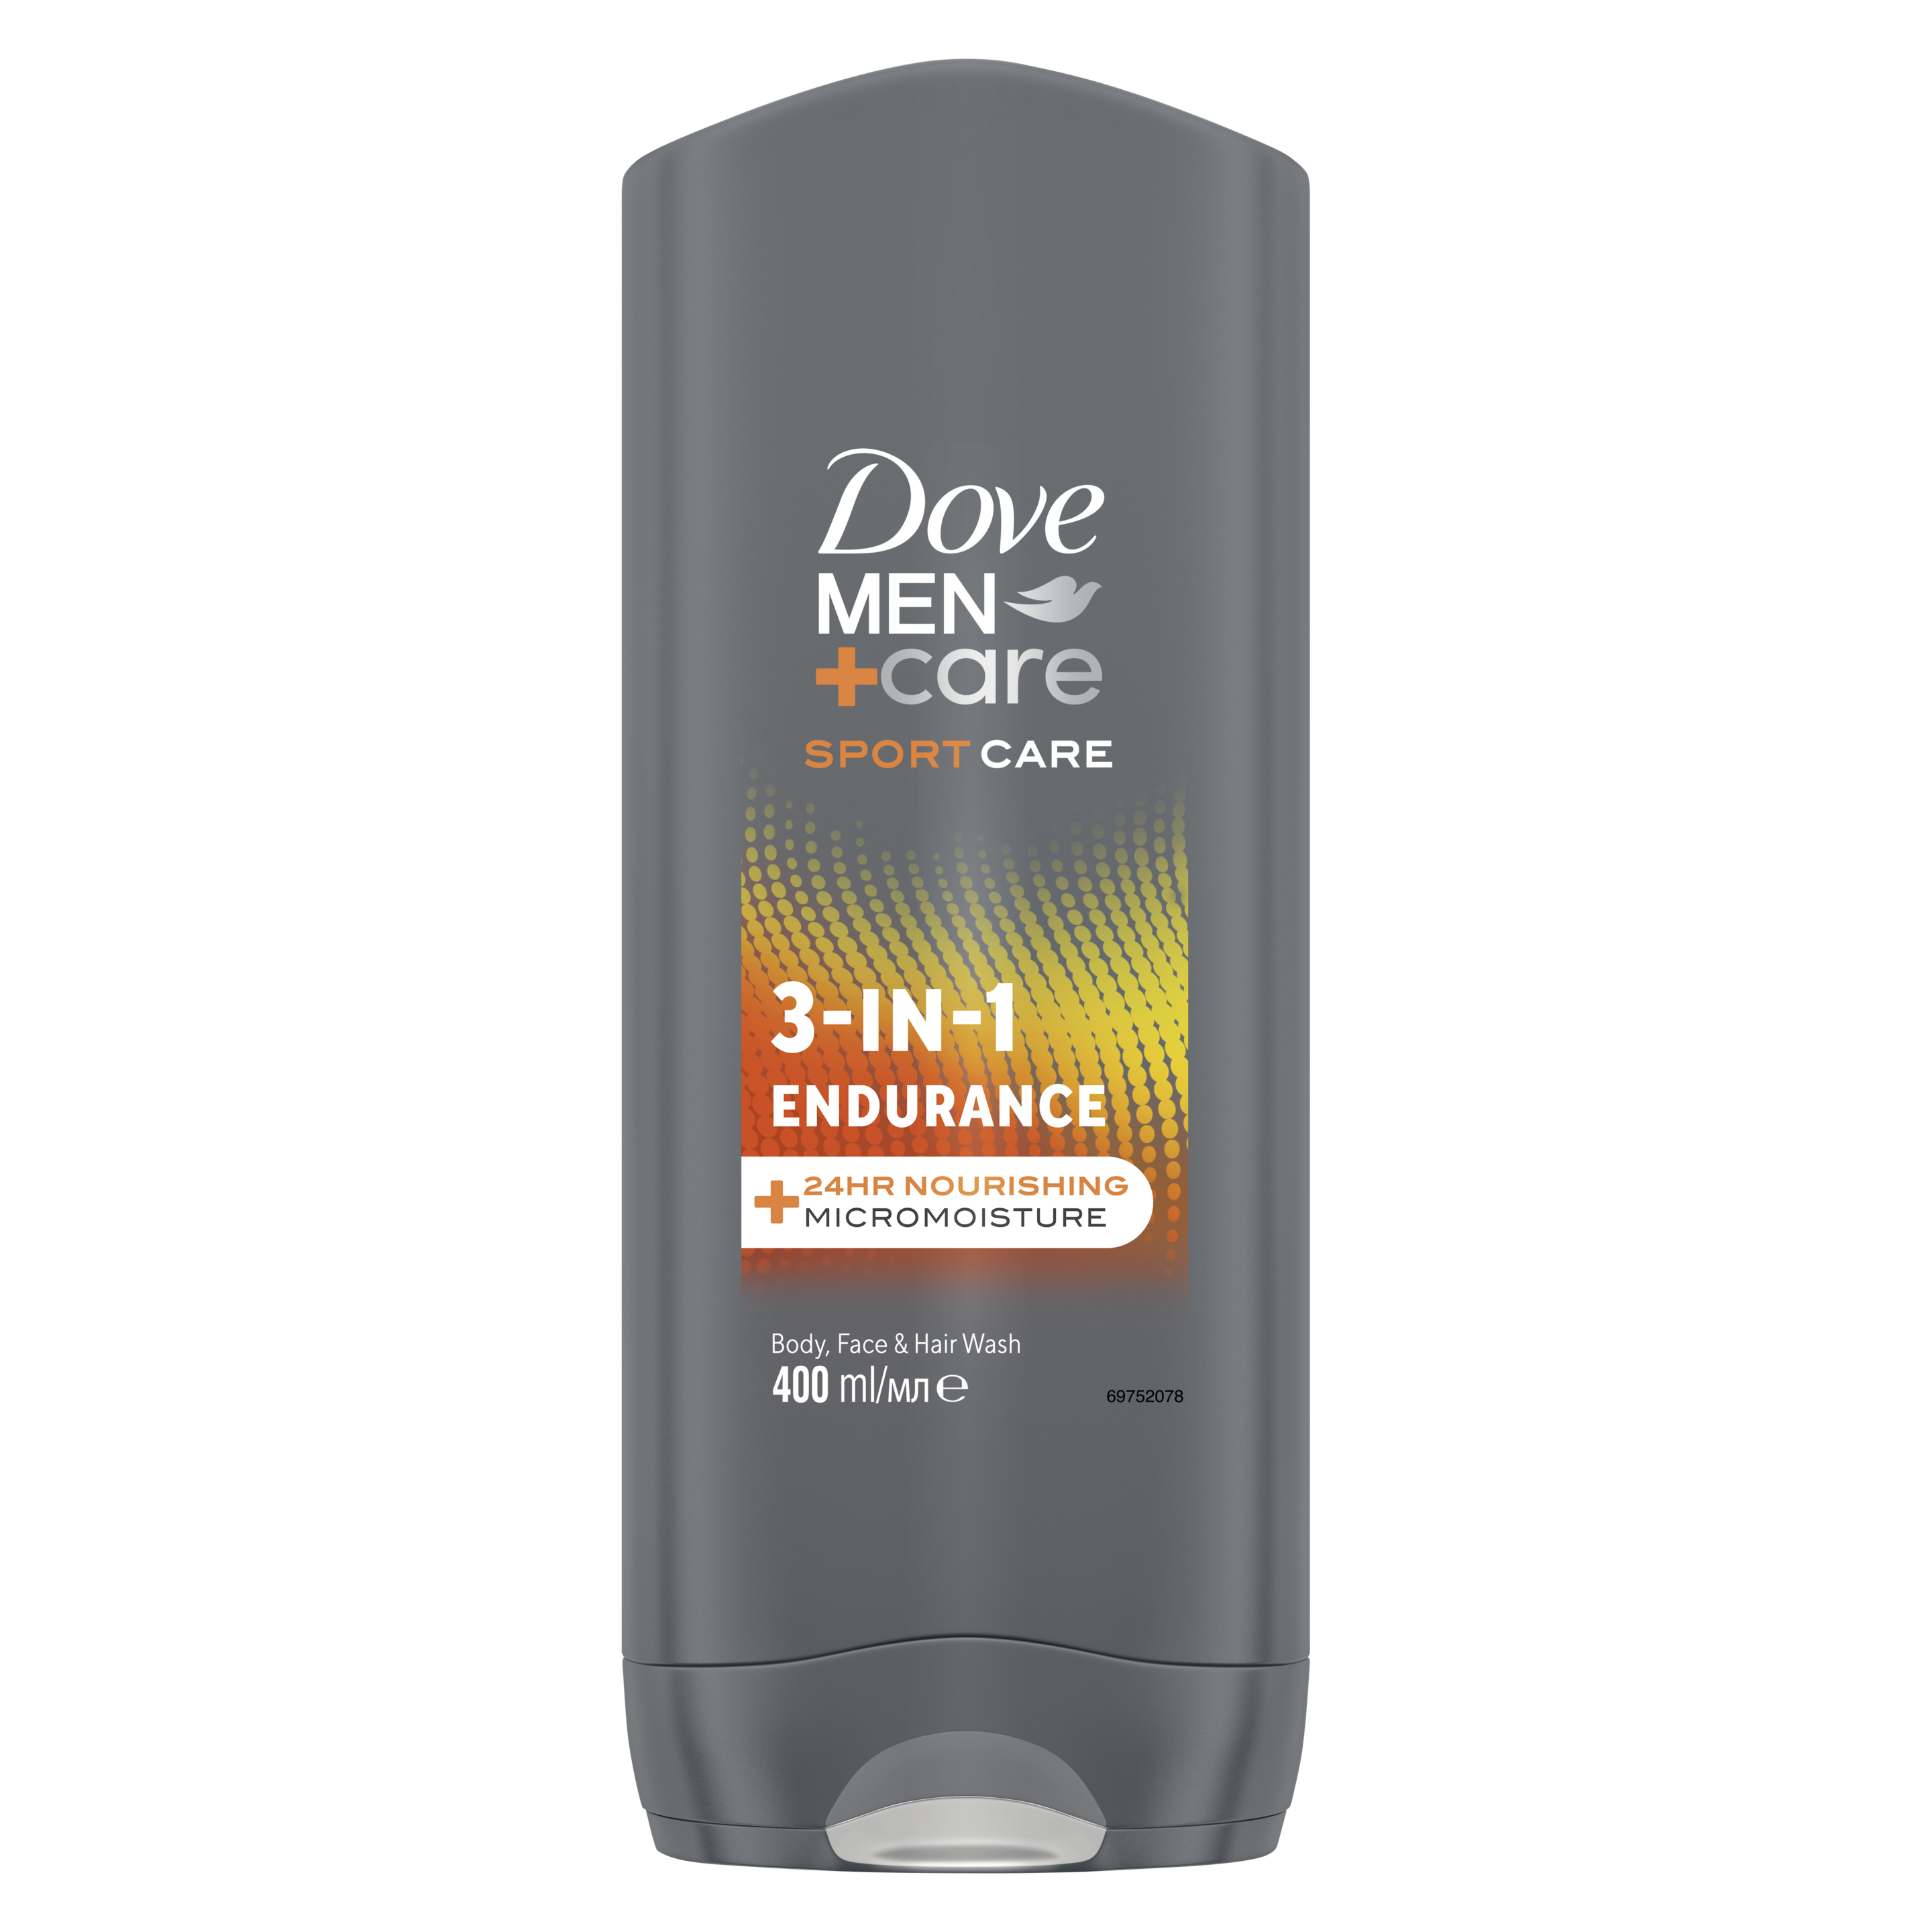 Endurance 3-in-1 Body Face and Hair Wash – Dove Men+Care